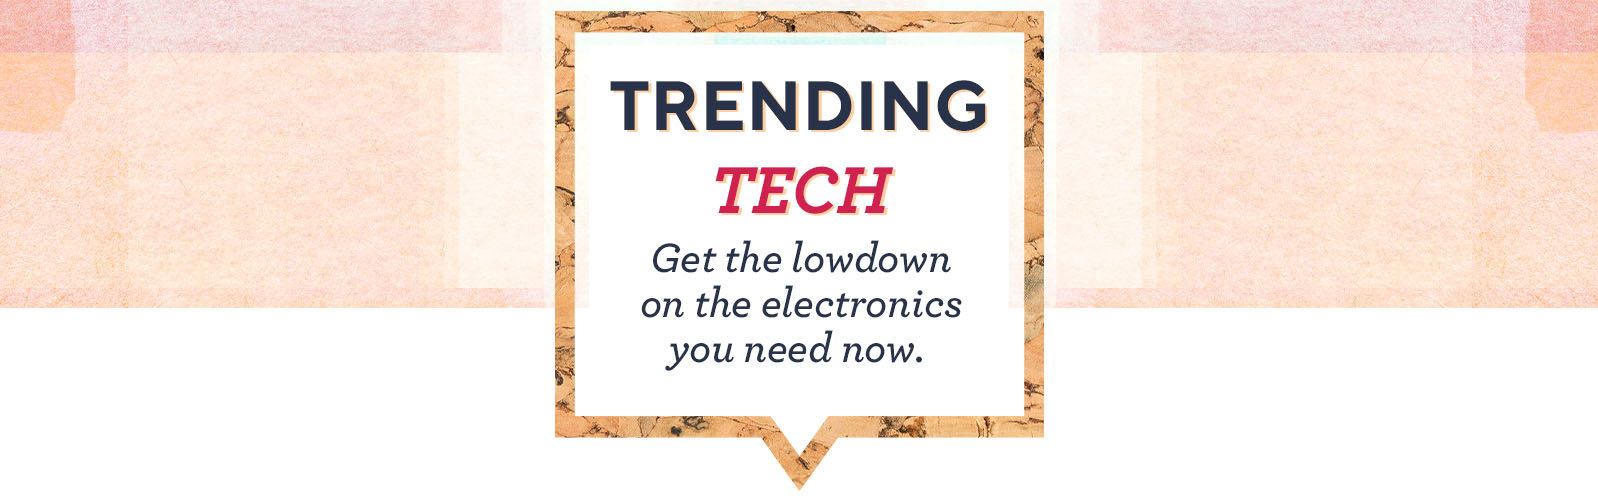 Trending Tech: Get the lowdown on the electronics you need now. 